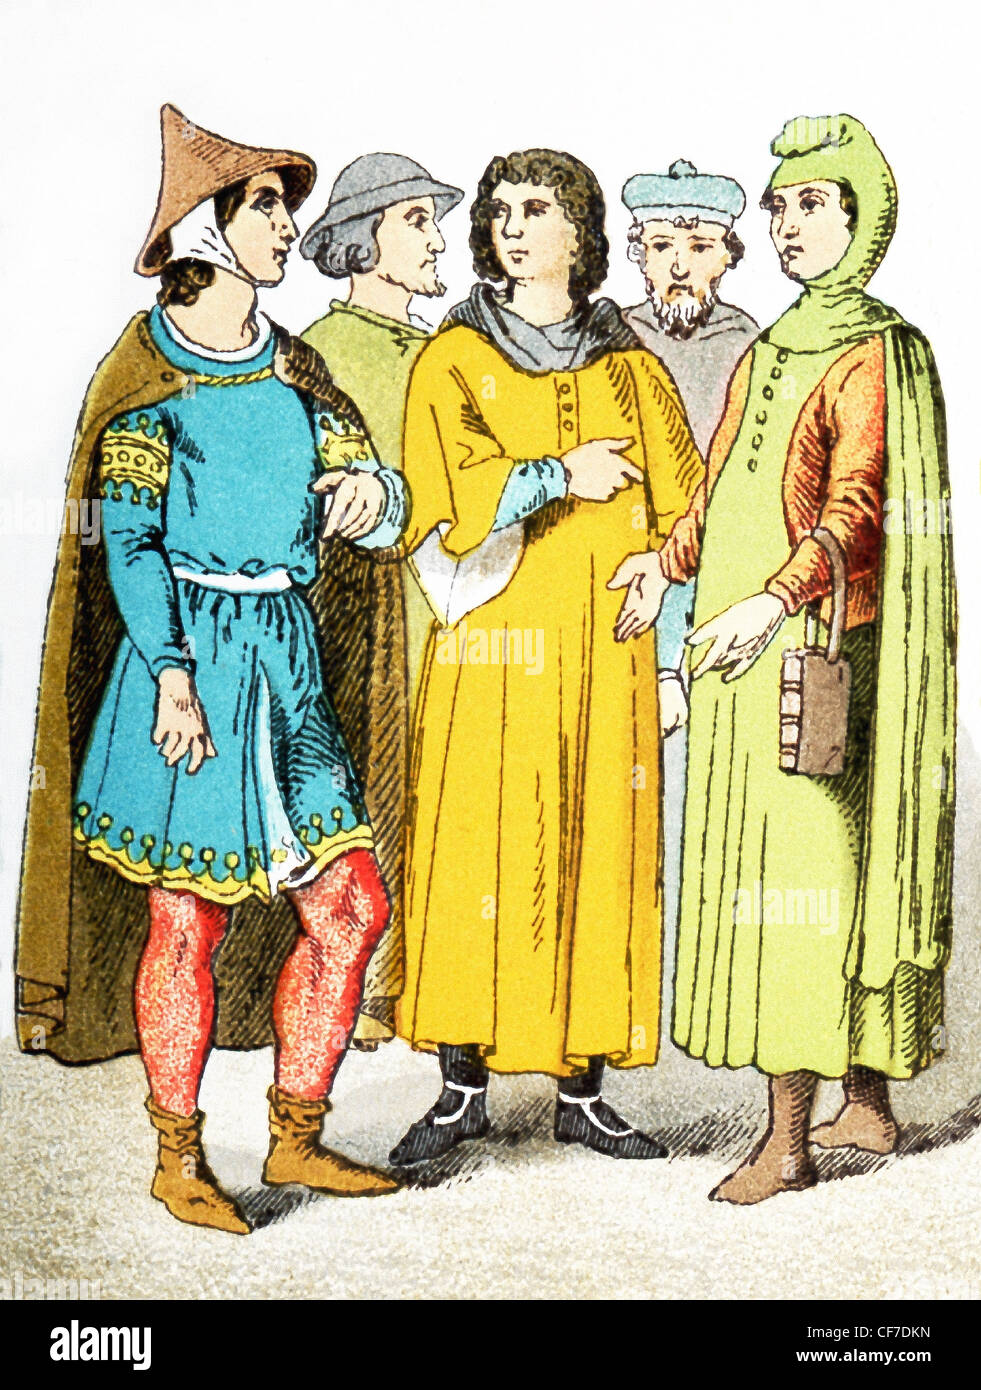 The figures in the illustration represent five French citizens around A.D. 1200. The illustration dates to 1882. Stock Photo